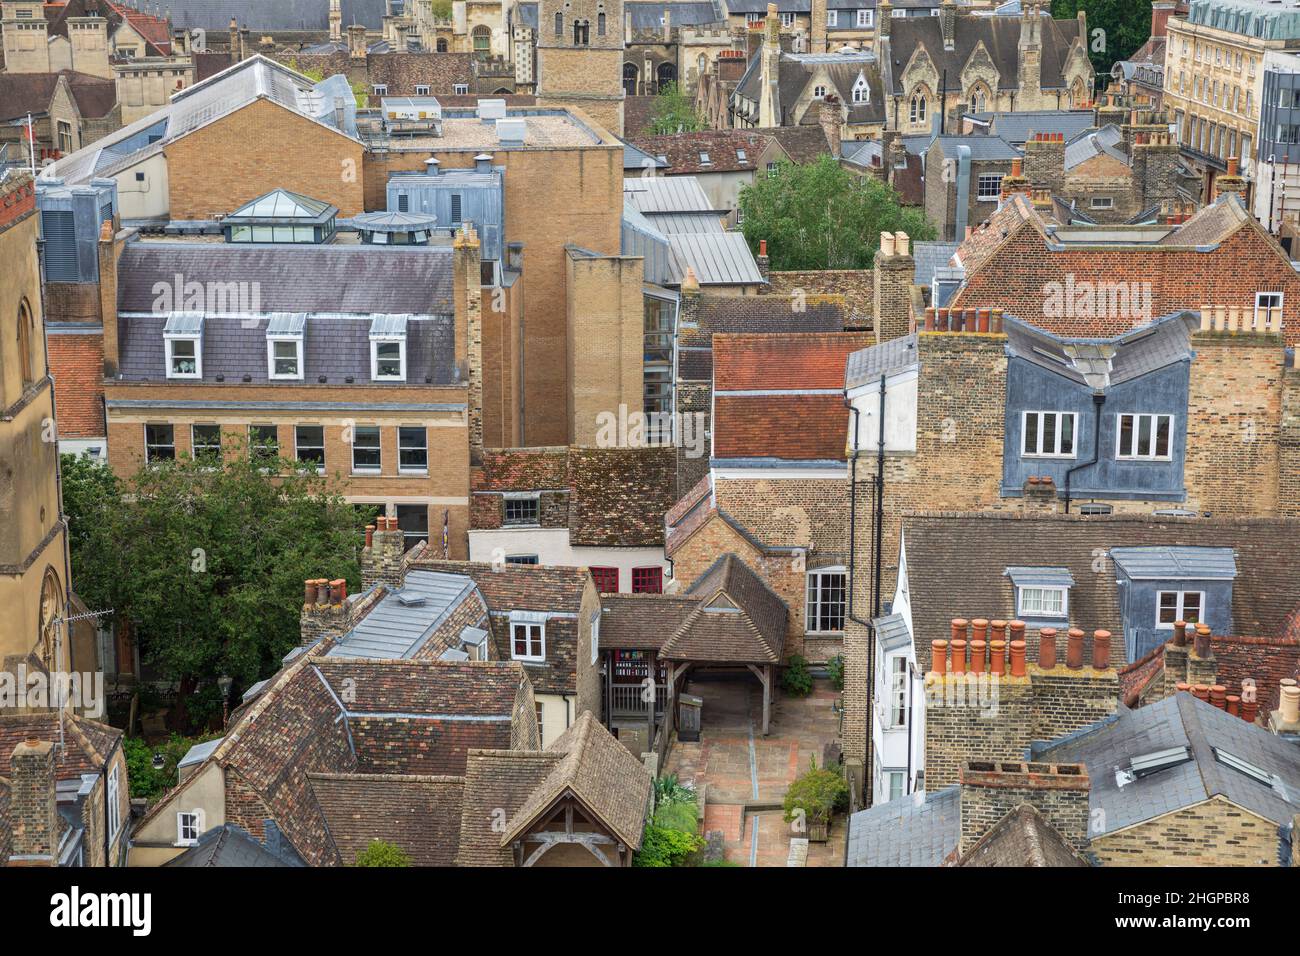 Rooftop view over Cambridge, England, as seen from the tower of Great St Mary's Church. Stock Photo